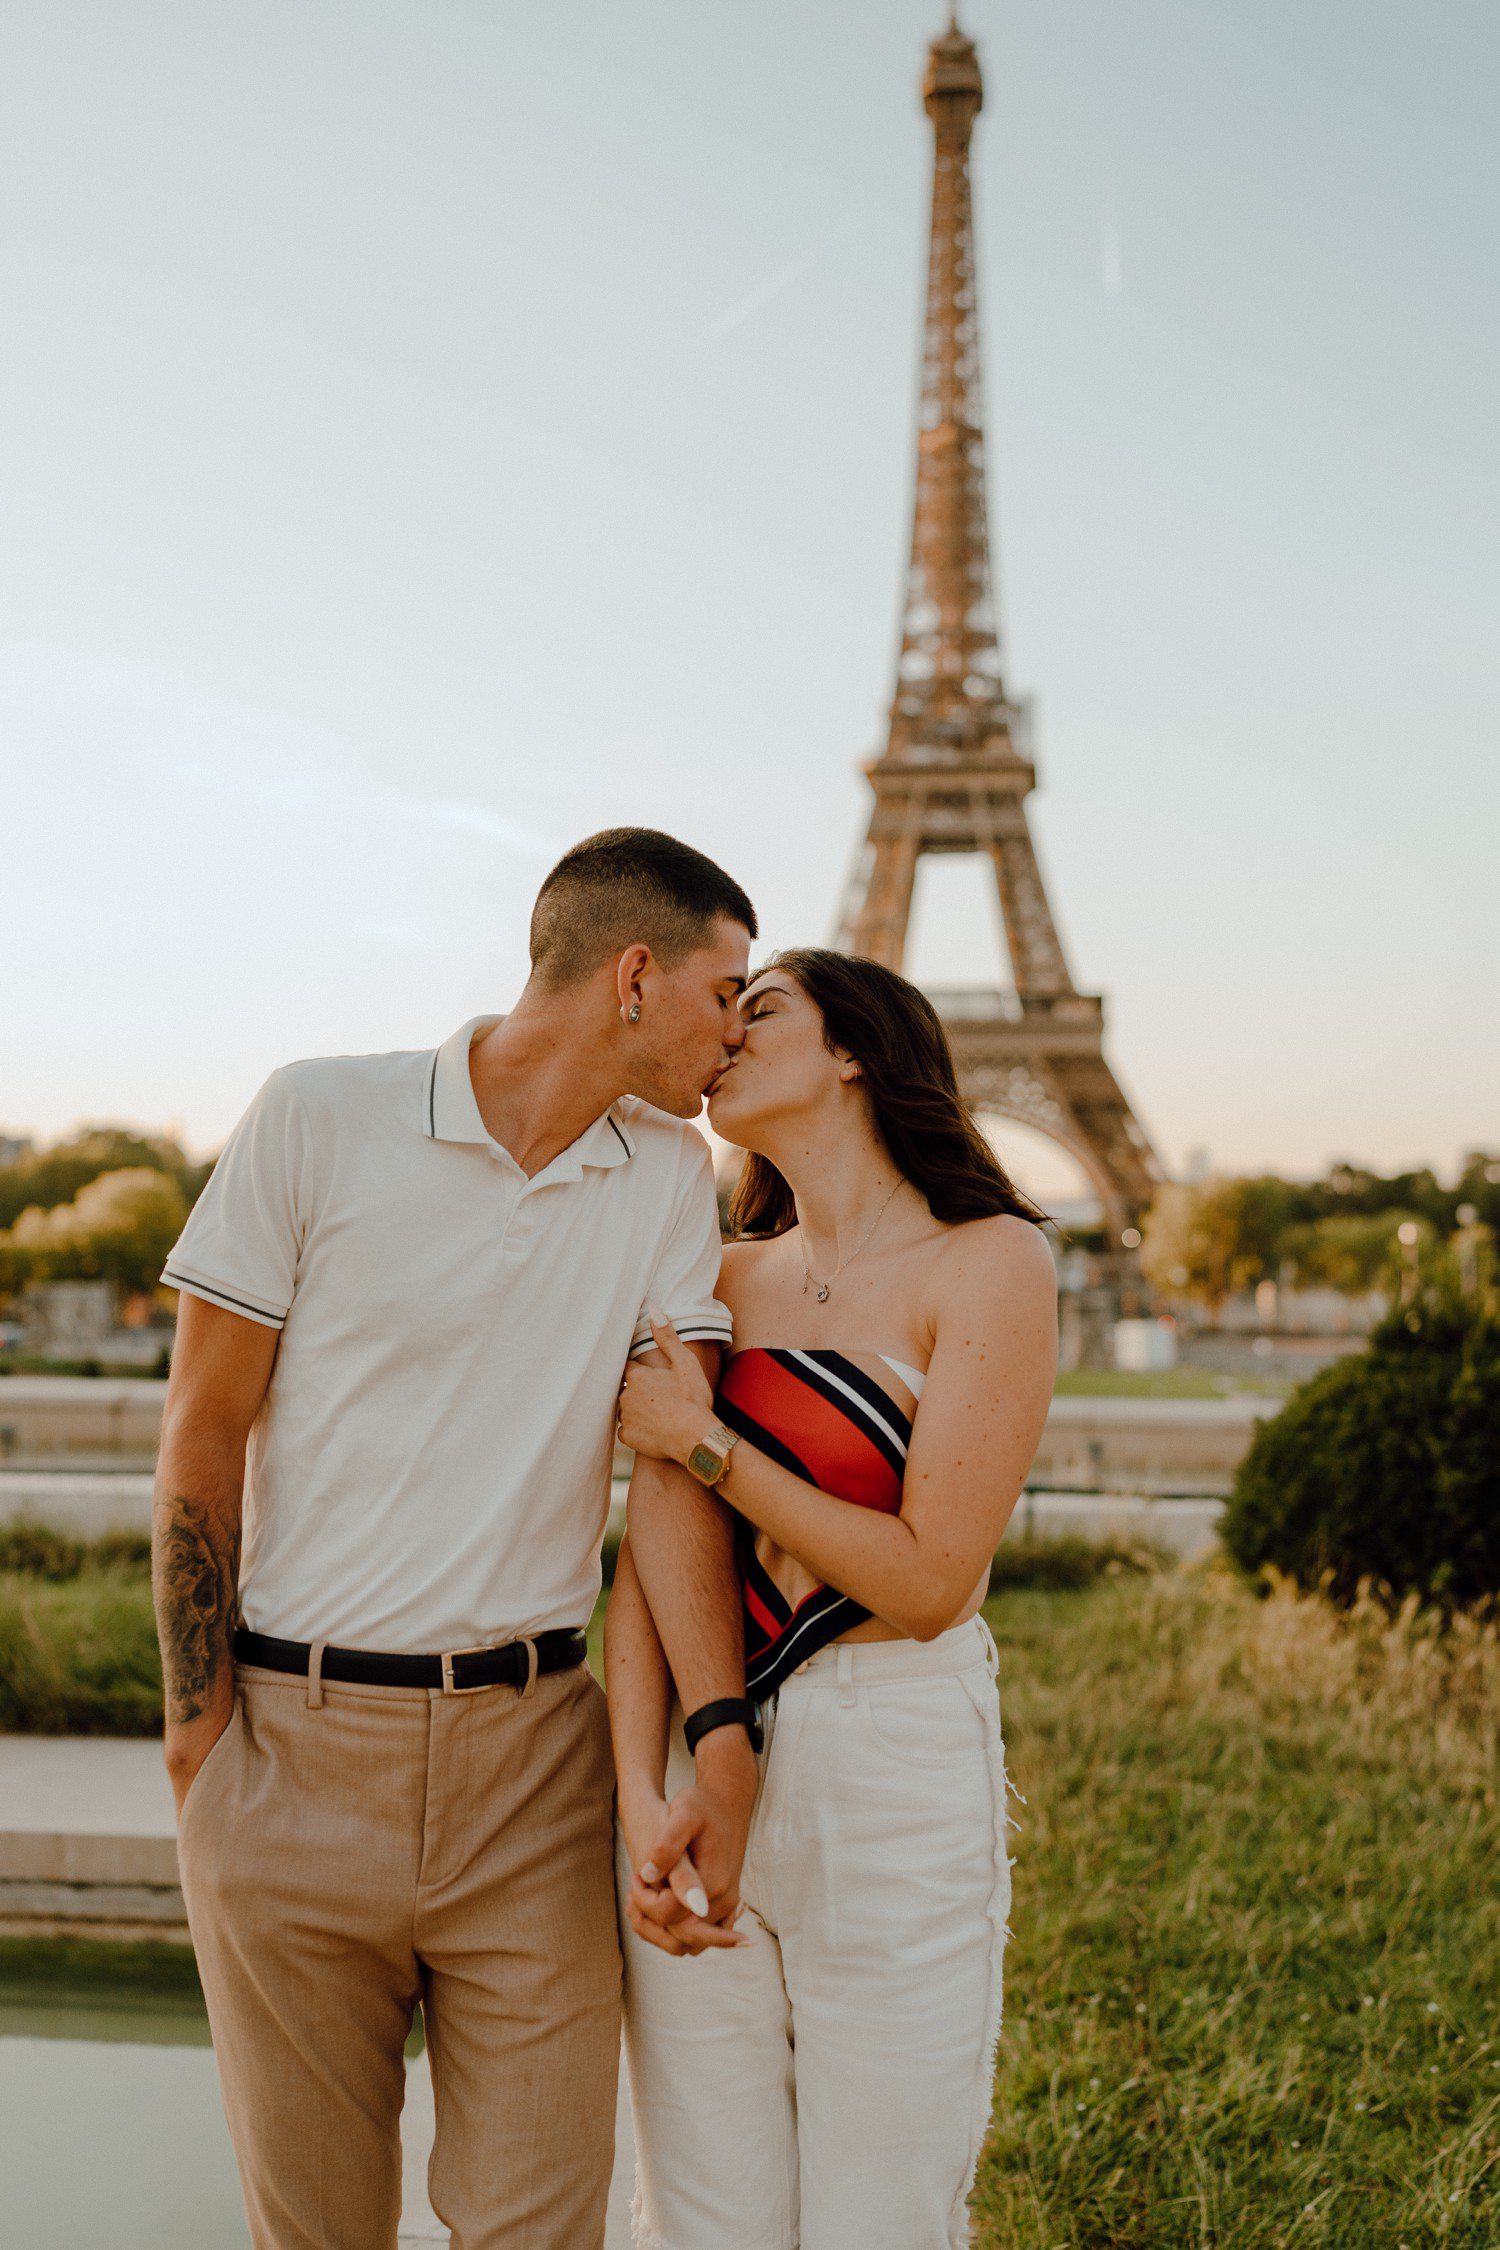 Couples photos at the Eiffel Tower in Paris